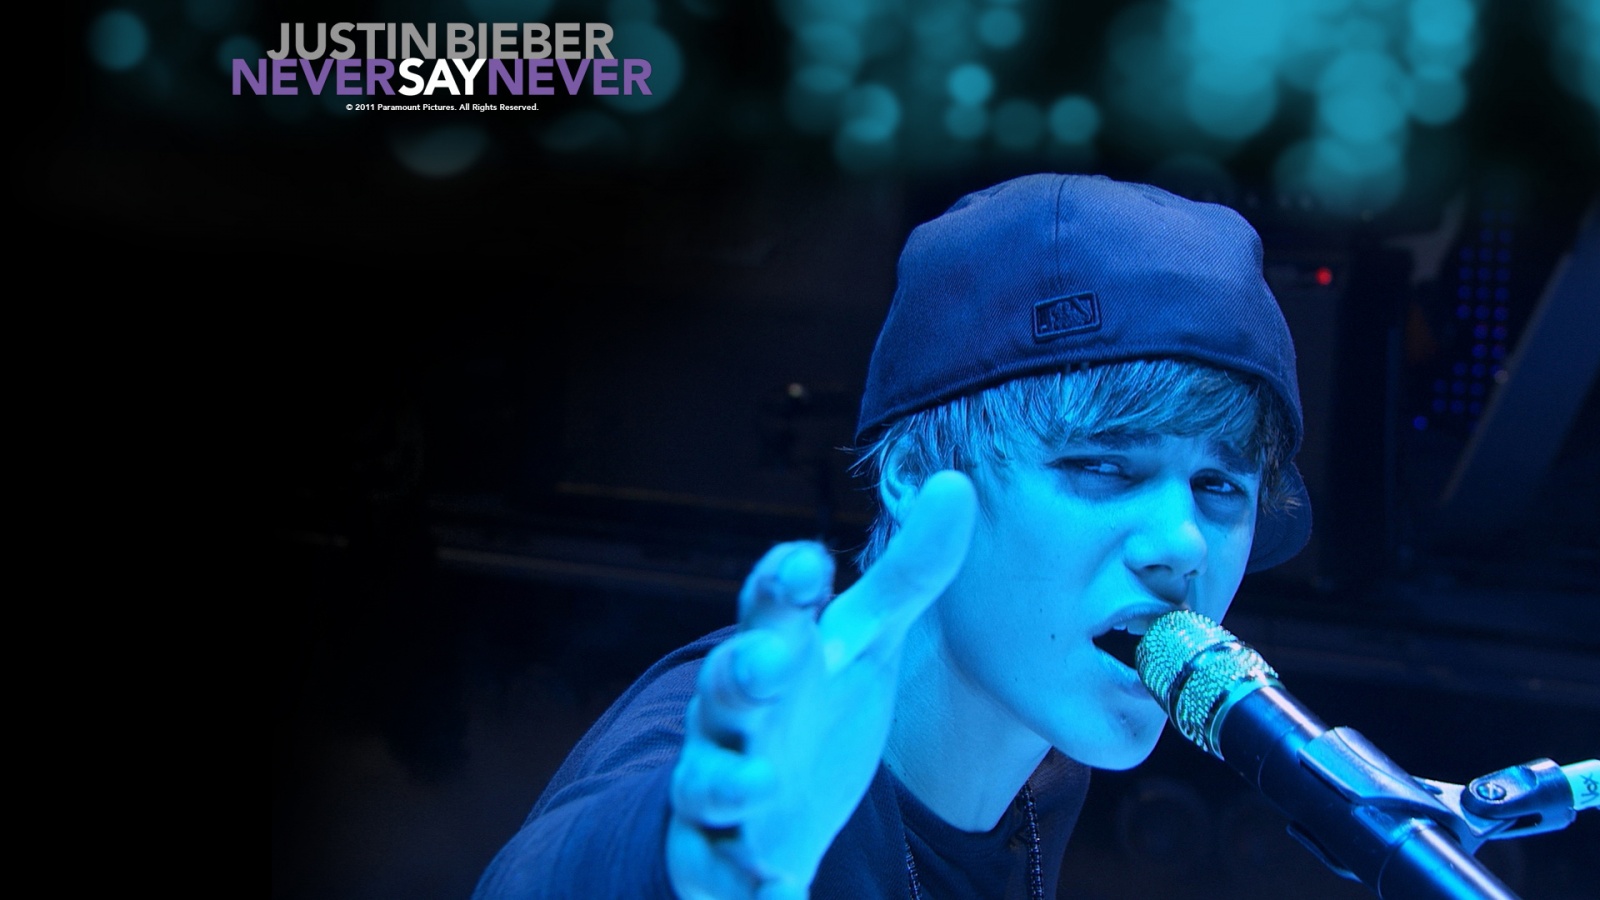 Justin Bieber Never Say Never Wallpapers In Jpg Format For Free Download